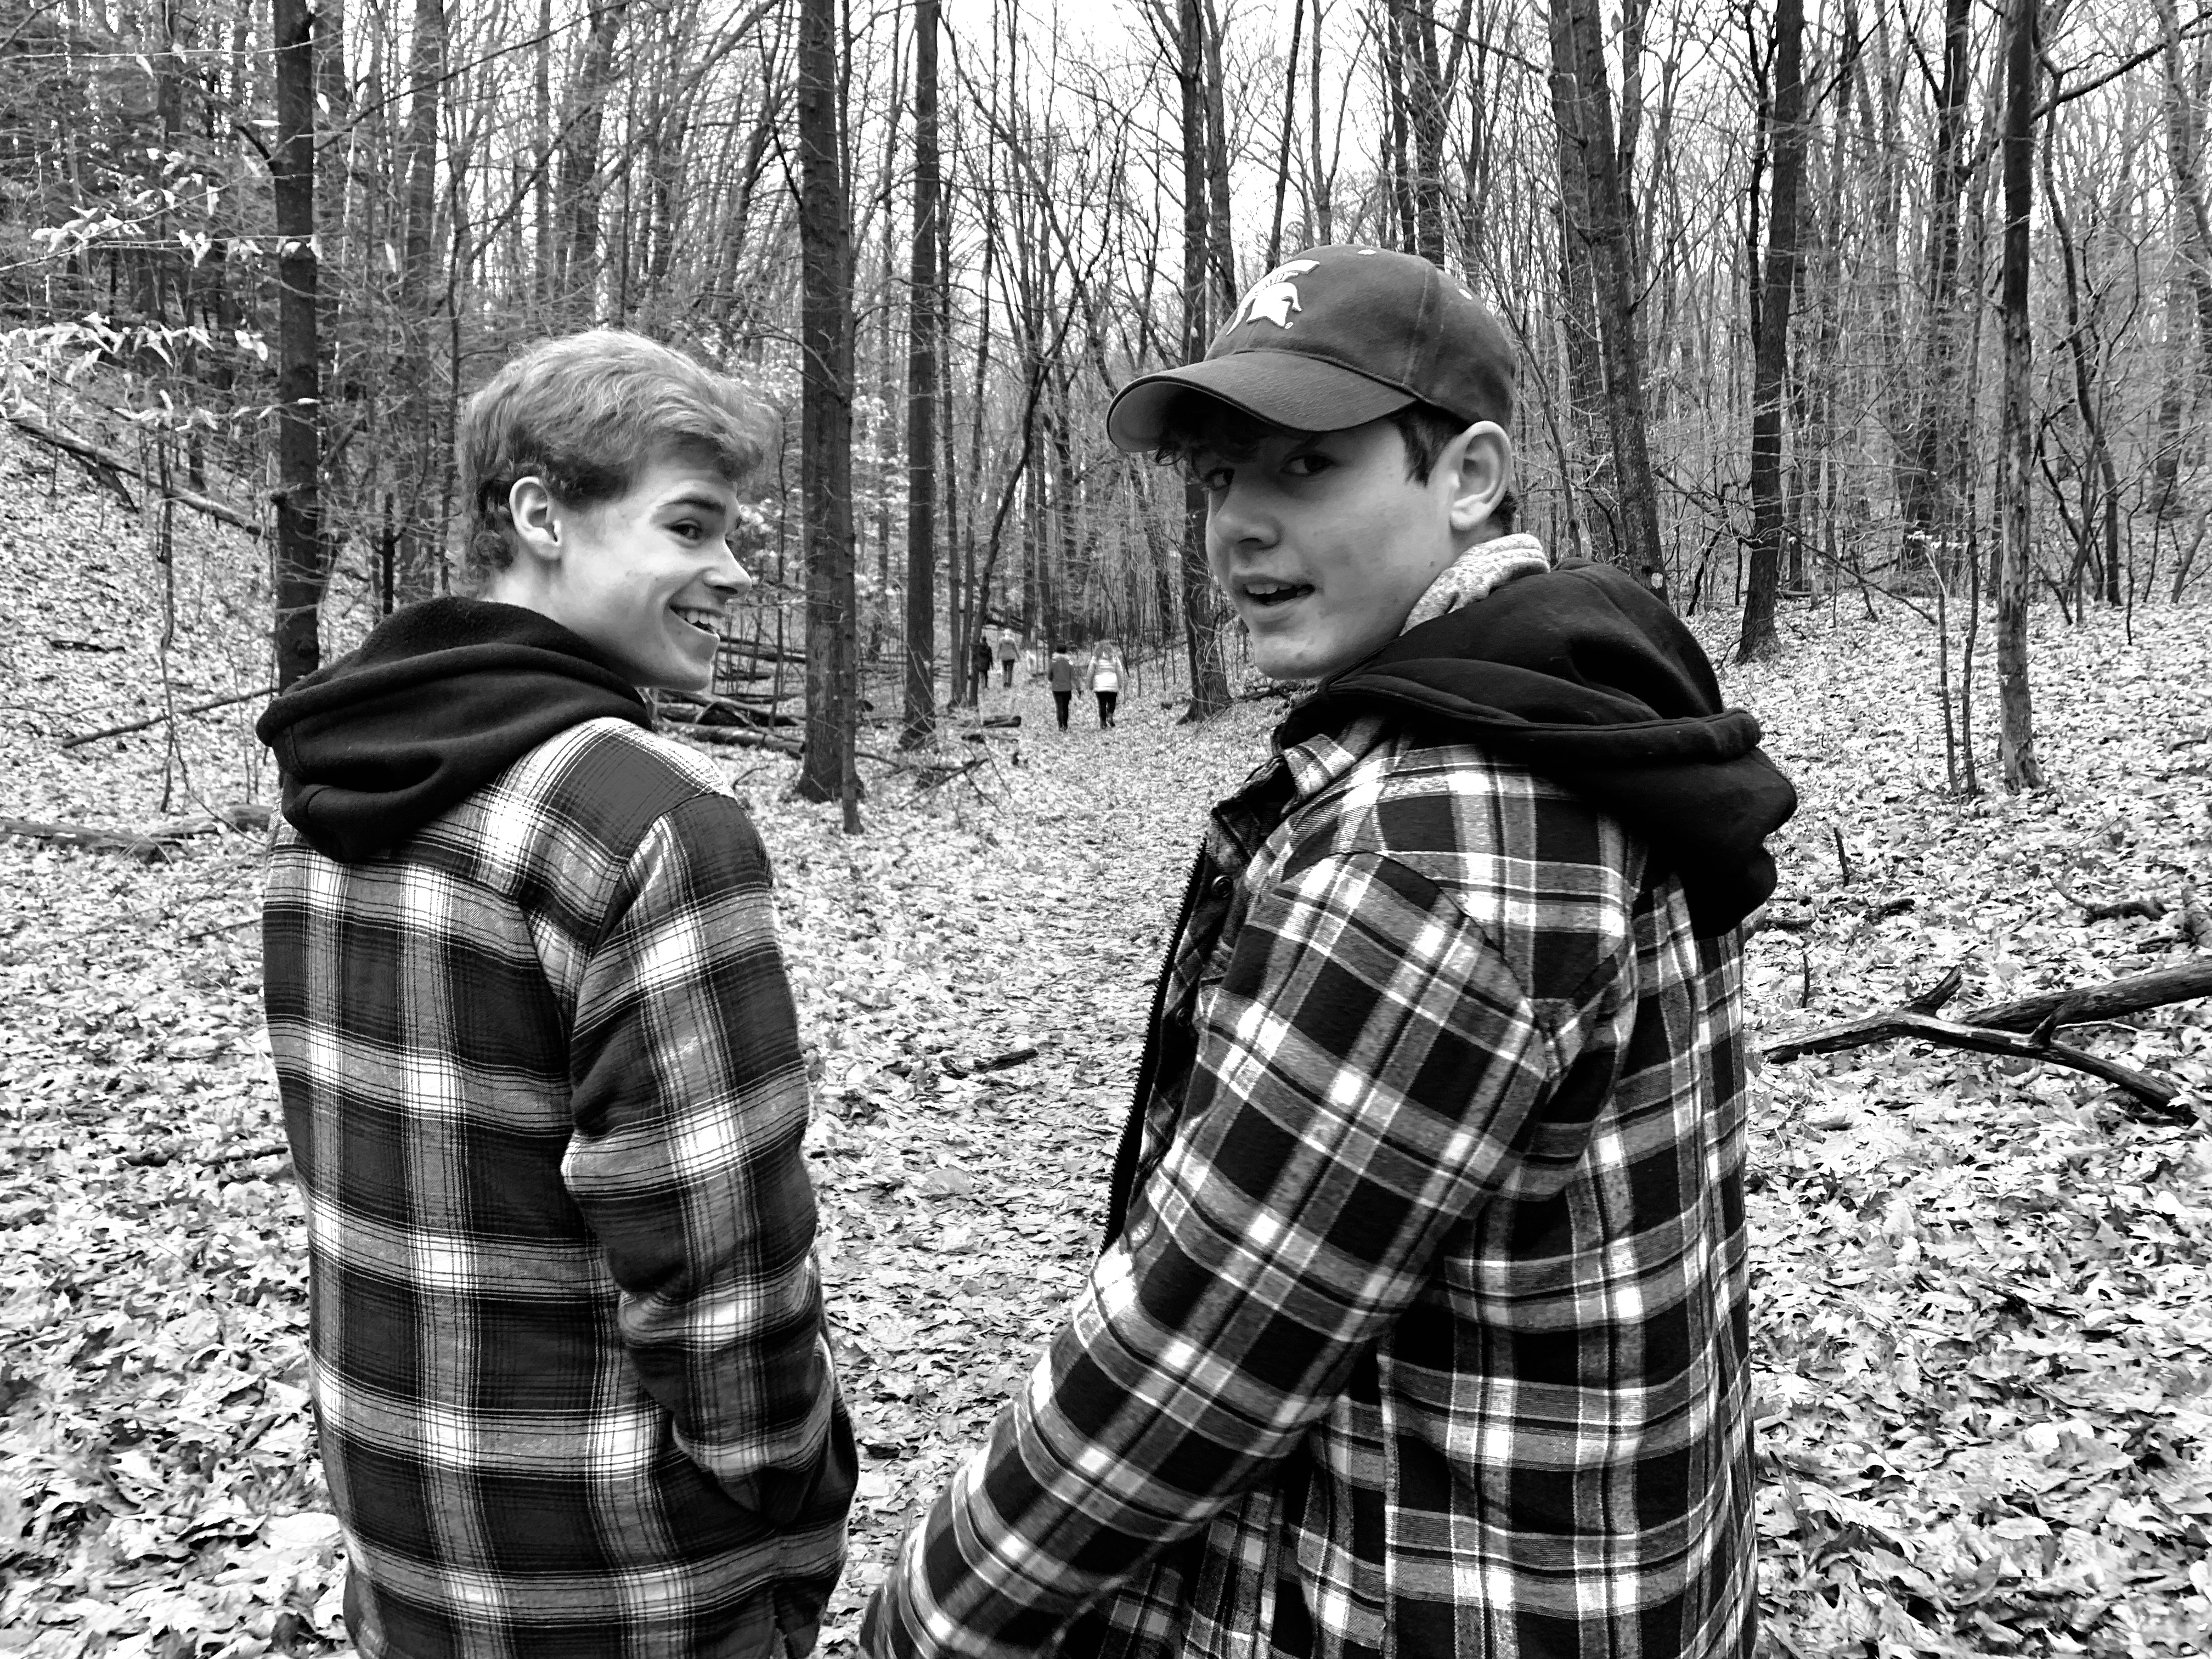 Logan and Anson Verlinde hiking in their matching flannels.